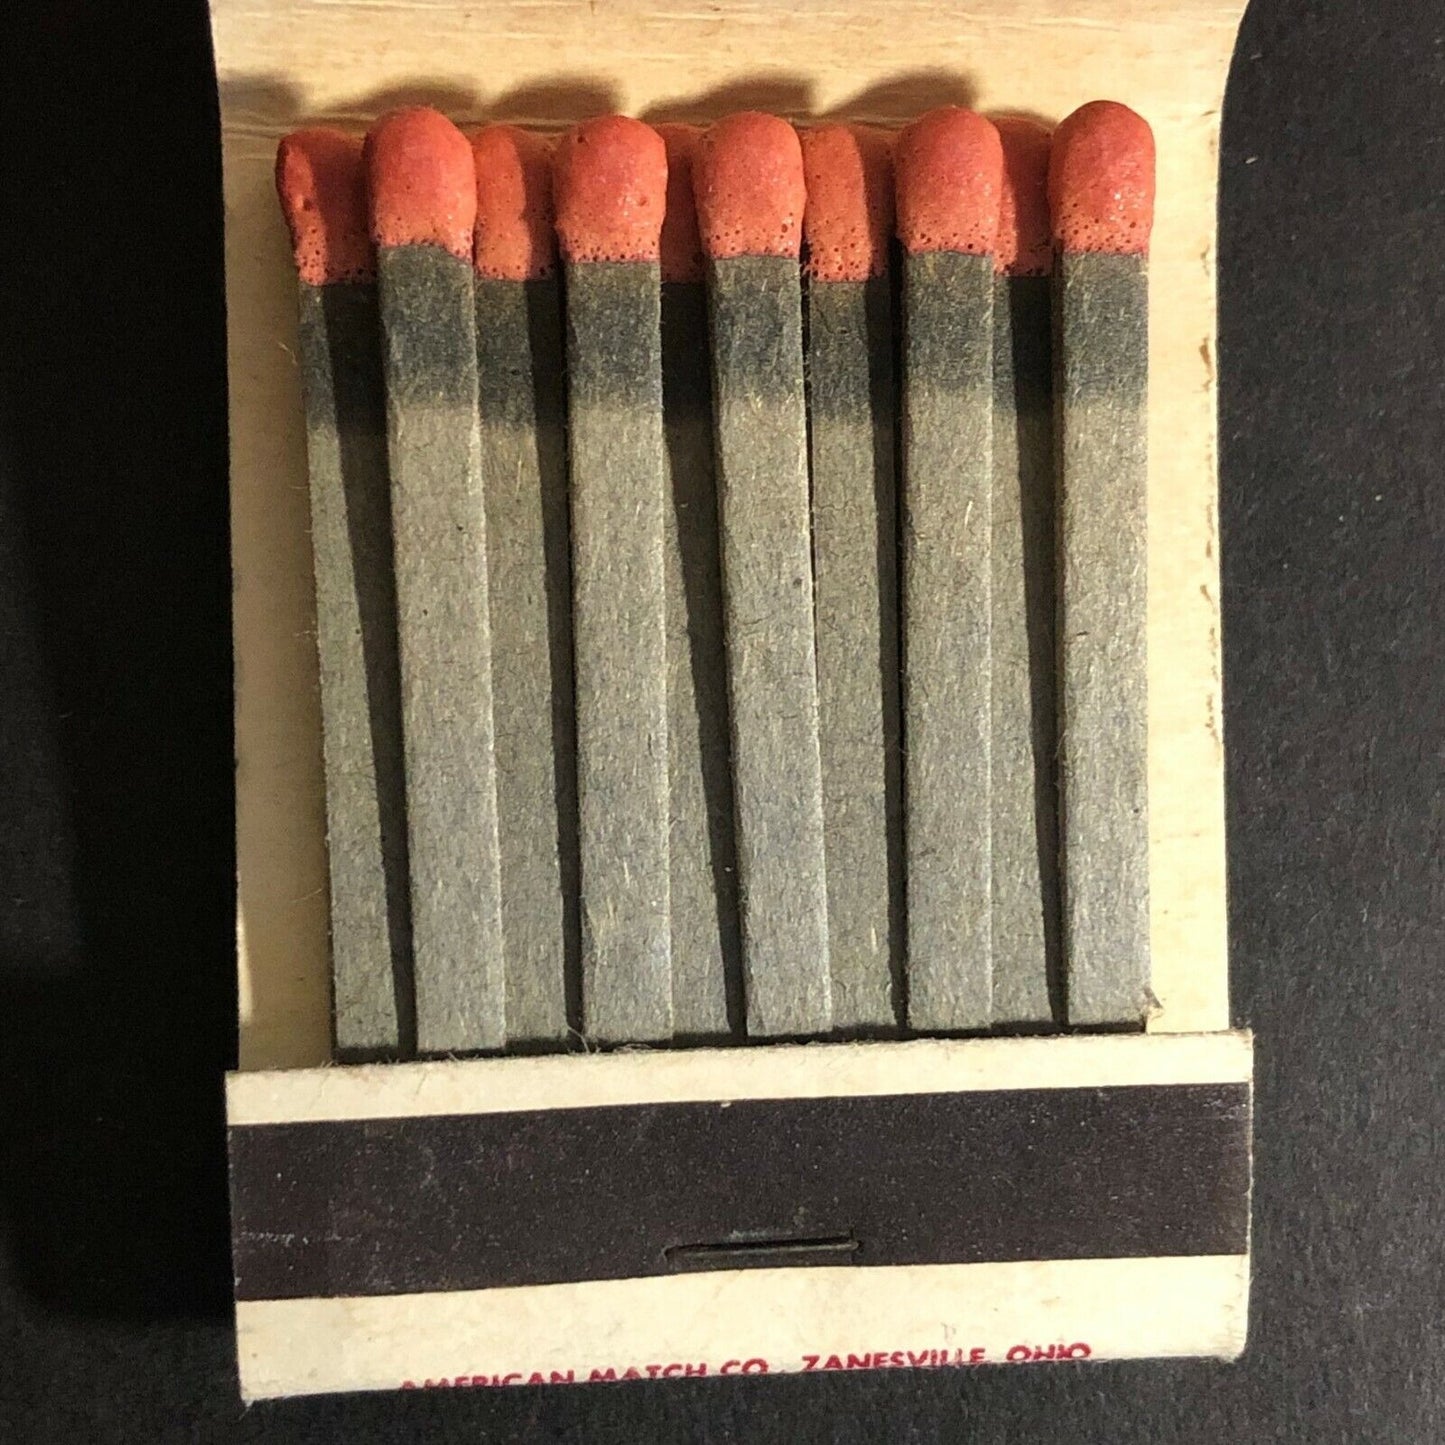 Scarce Vintage c1940's-50's Full Matchbook "The Greatest Guy in the World..."